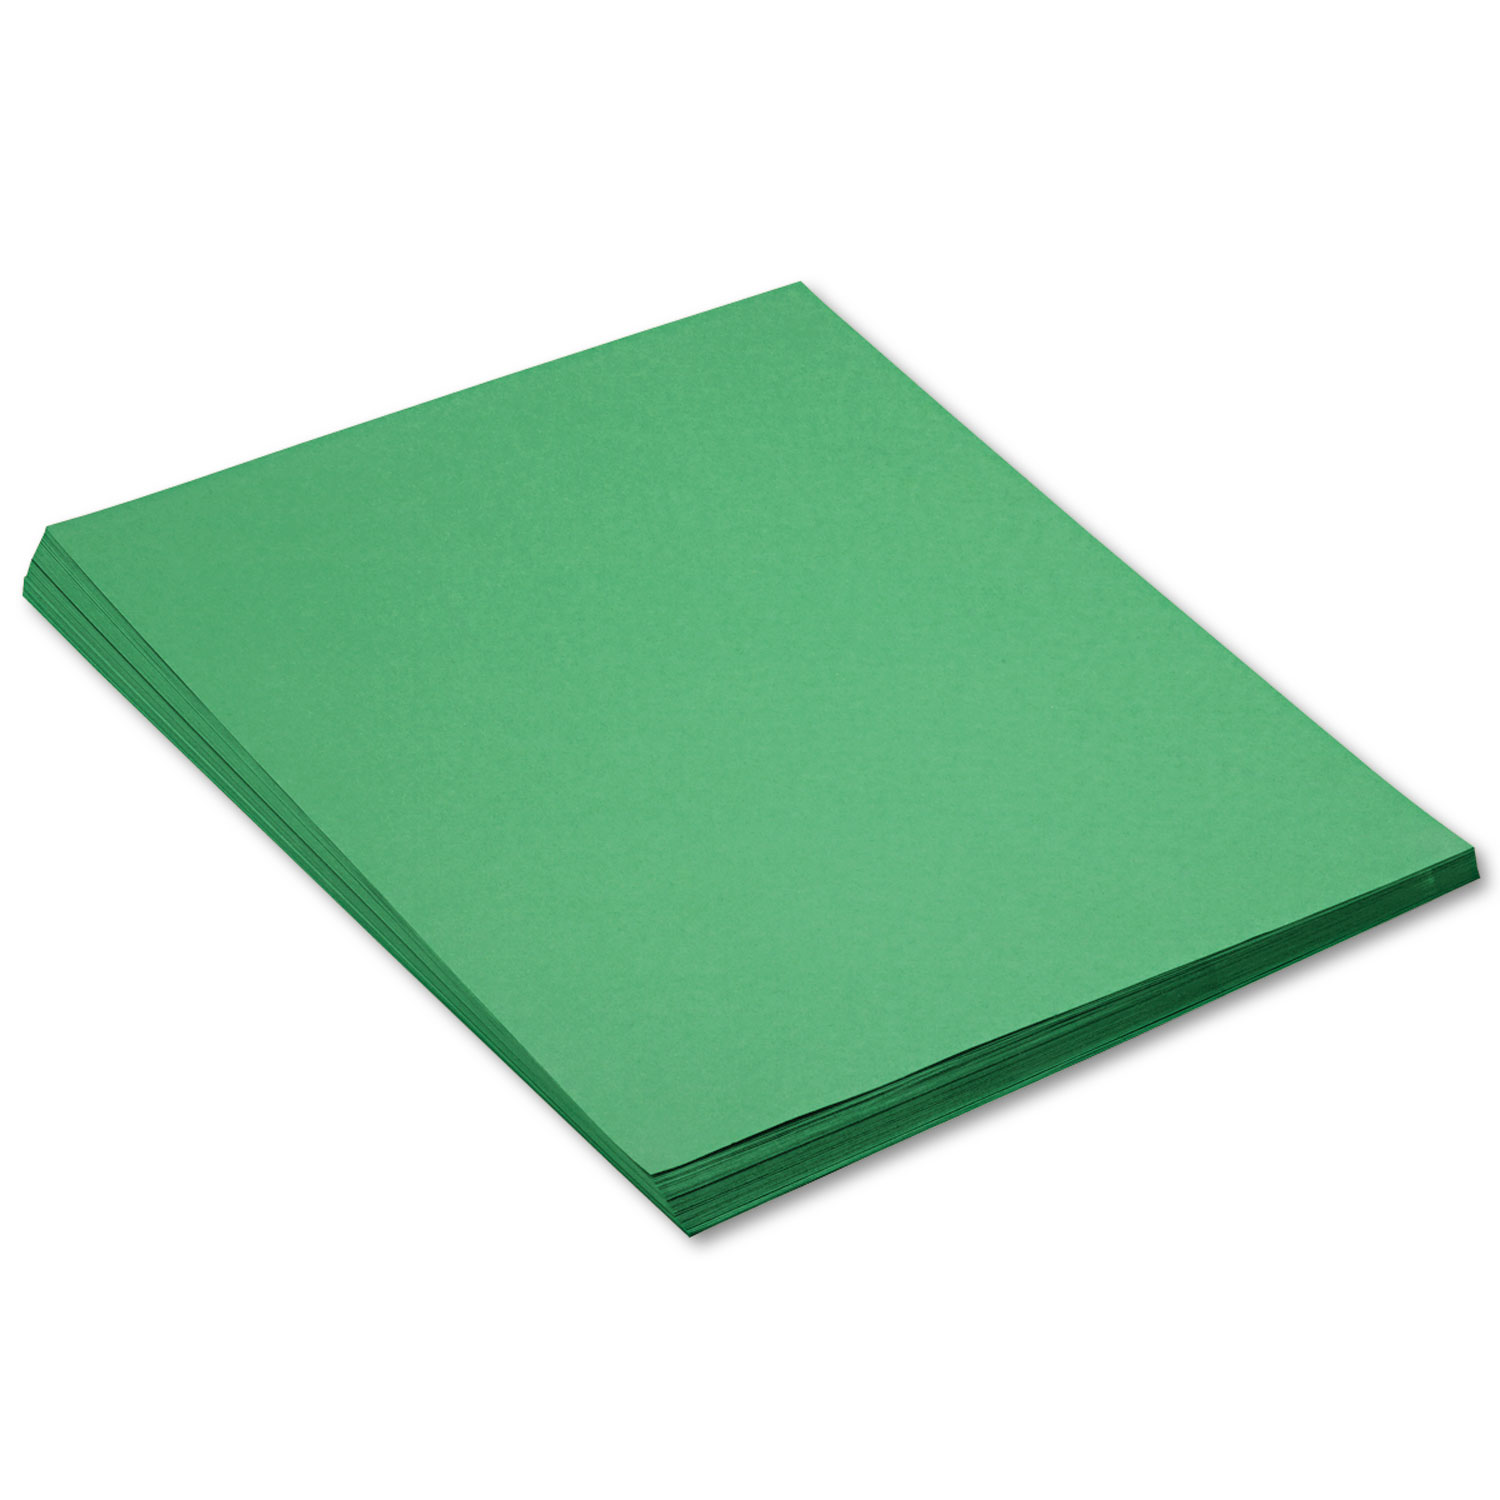 SunWorks PAC8017 Construction Paper, 58 lbs., 18 x 24, Holiday Green